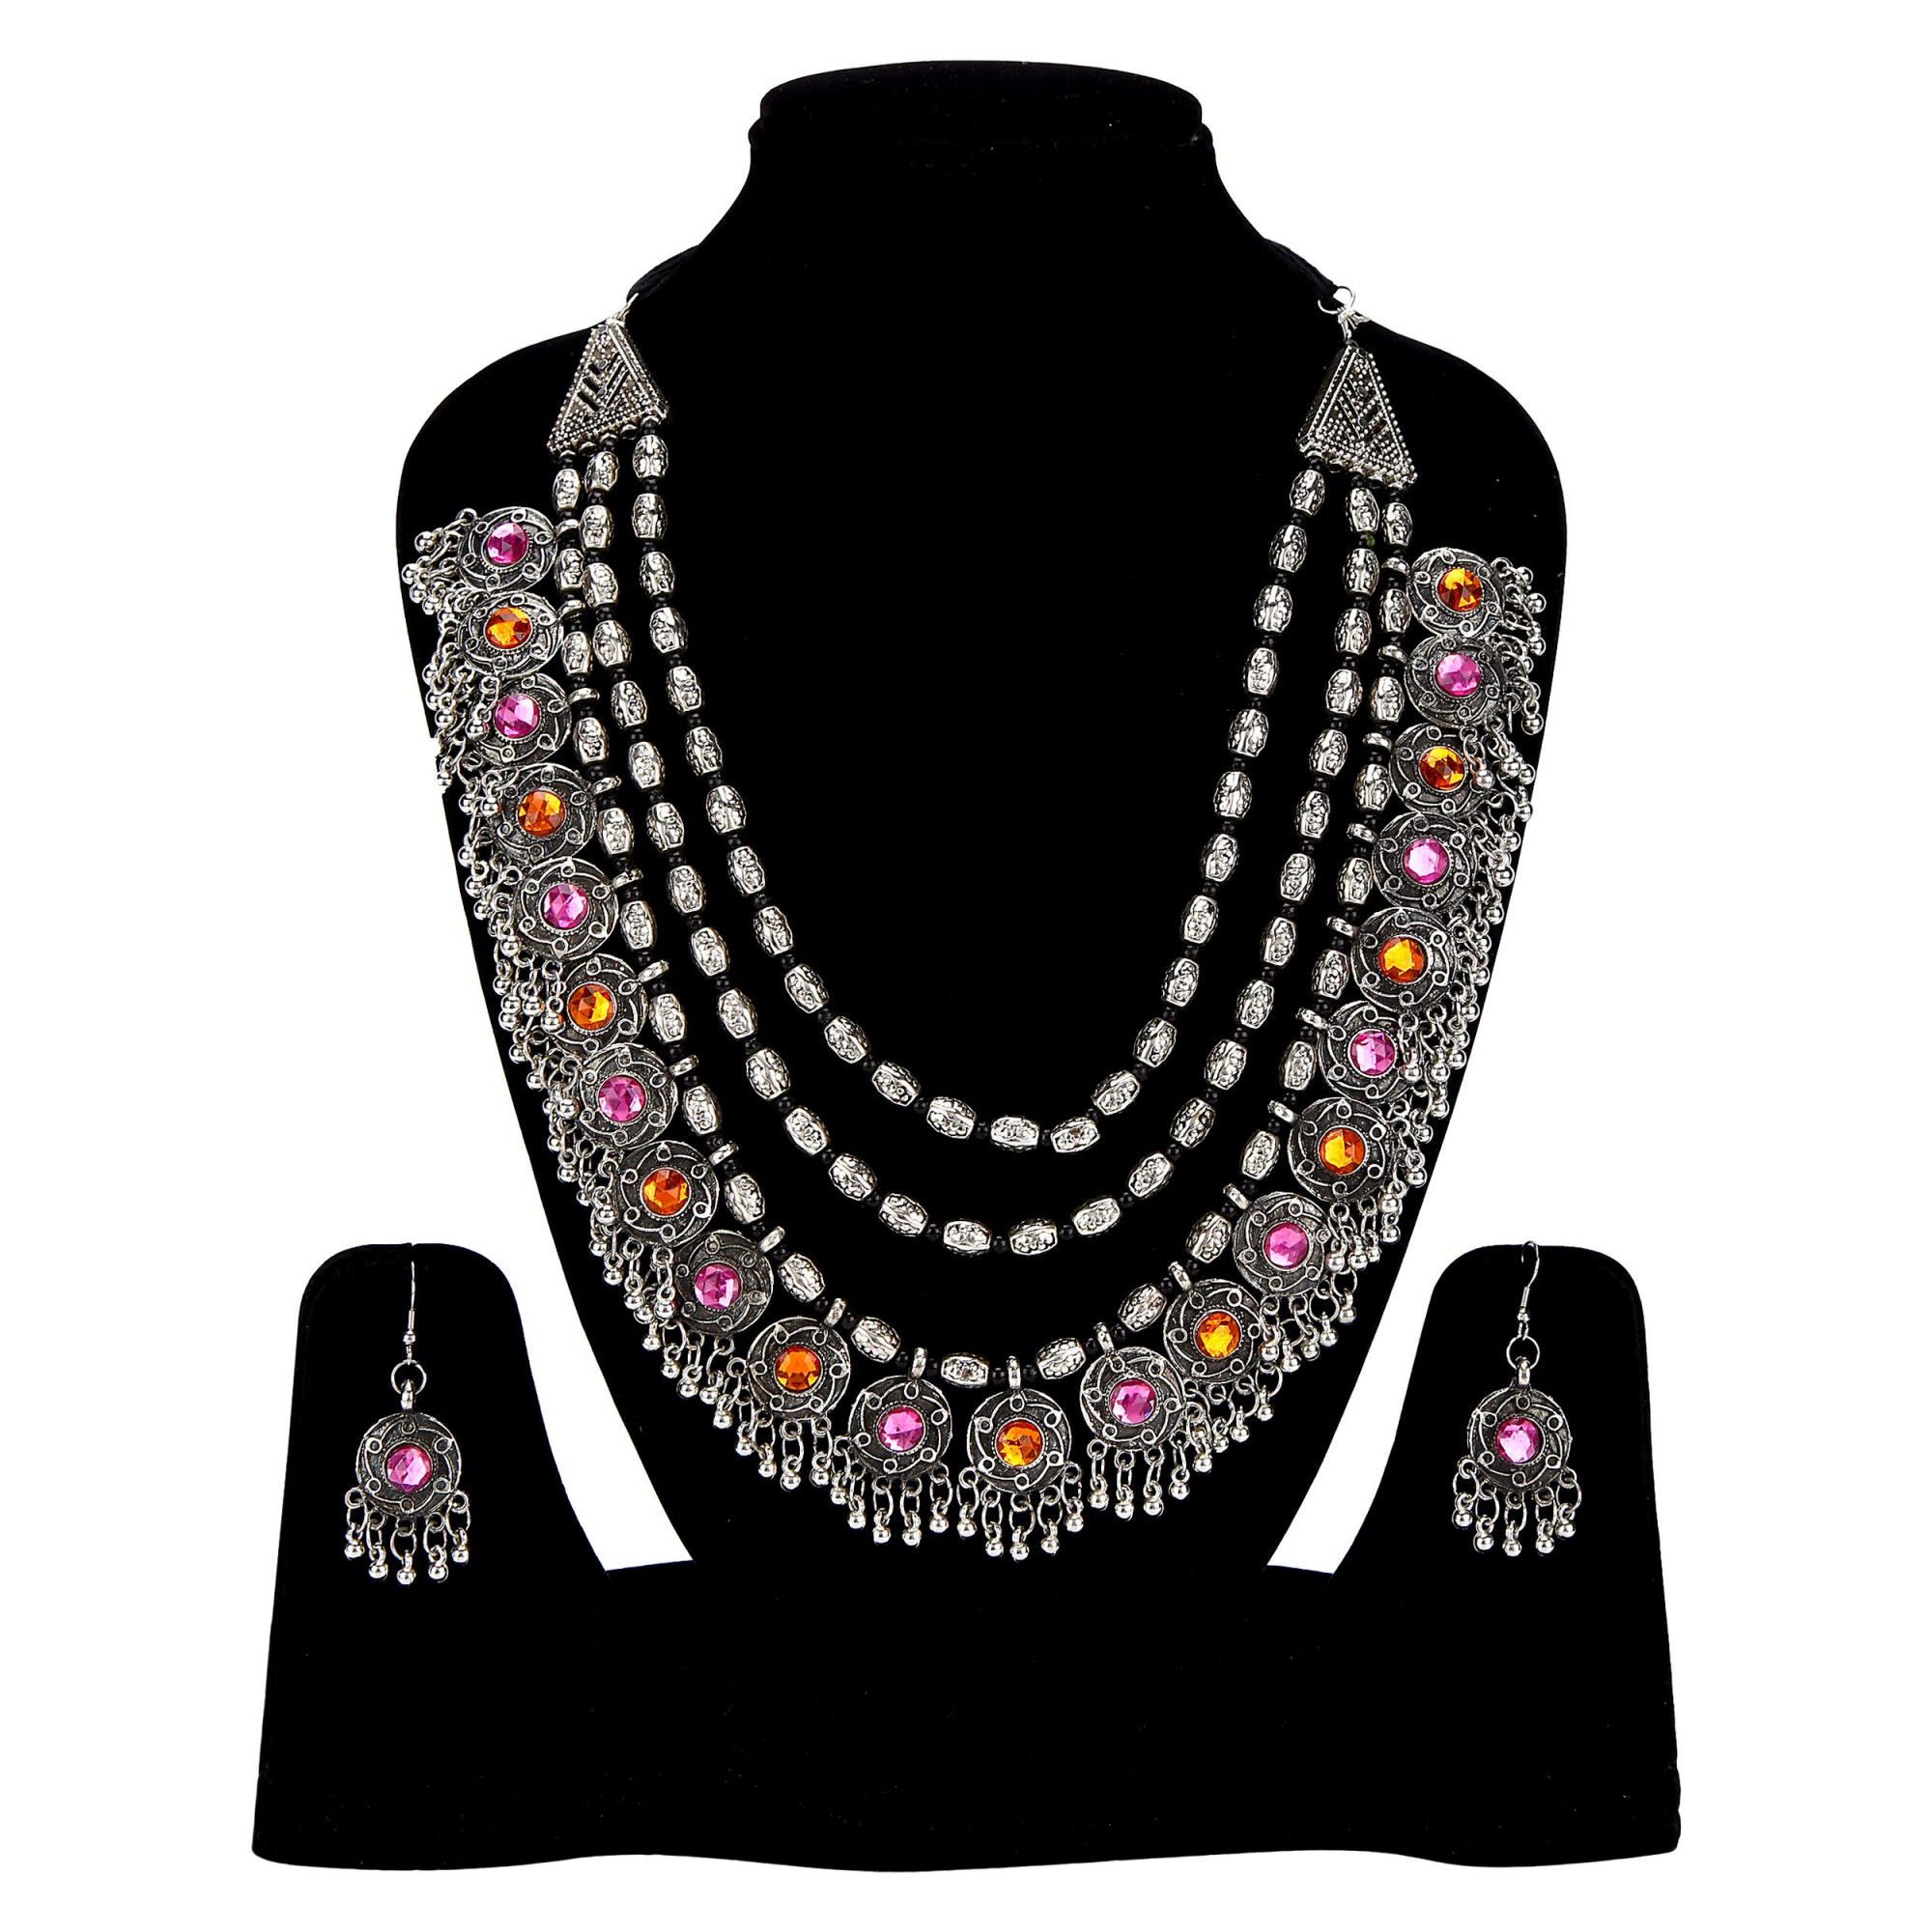 New Fashion Colorful Beads Bridal Earrings Necklace Statement Jewelry Set